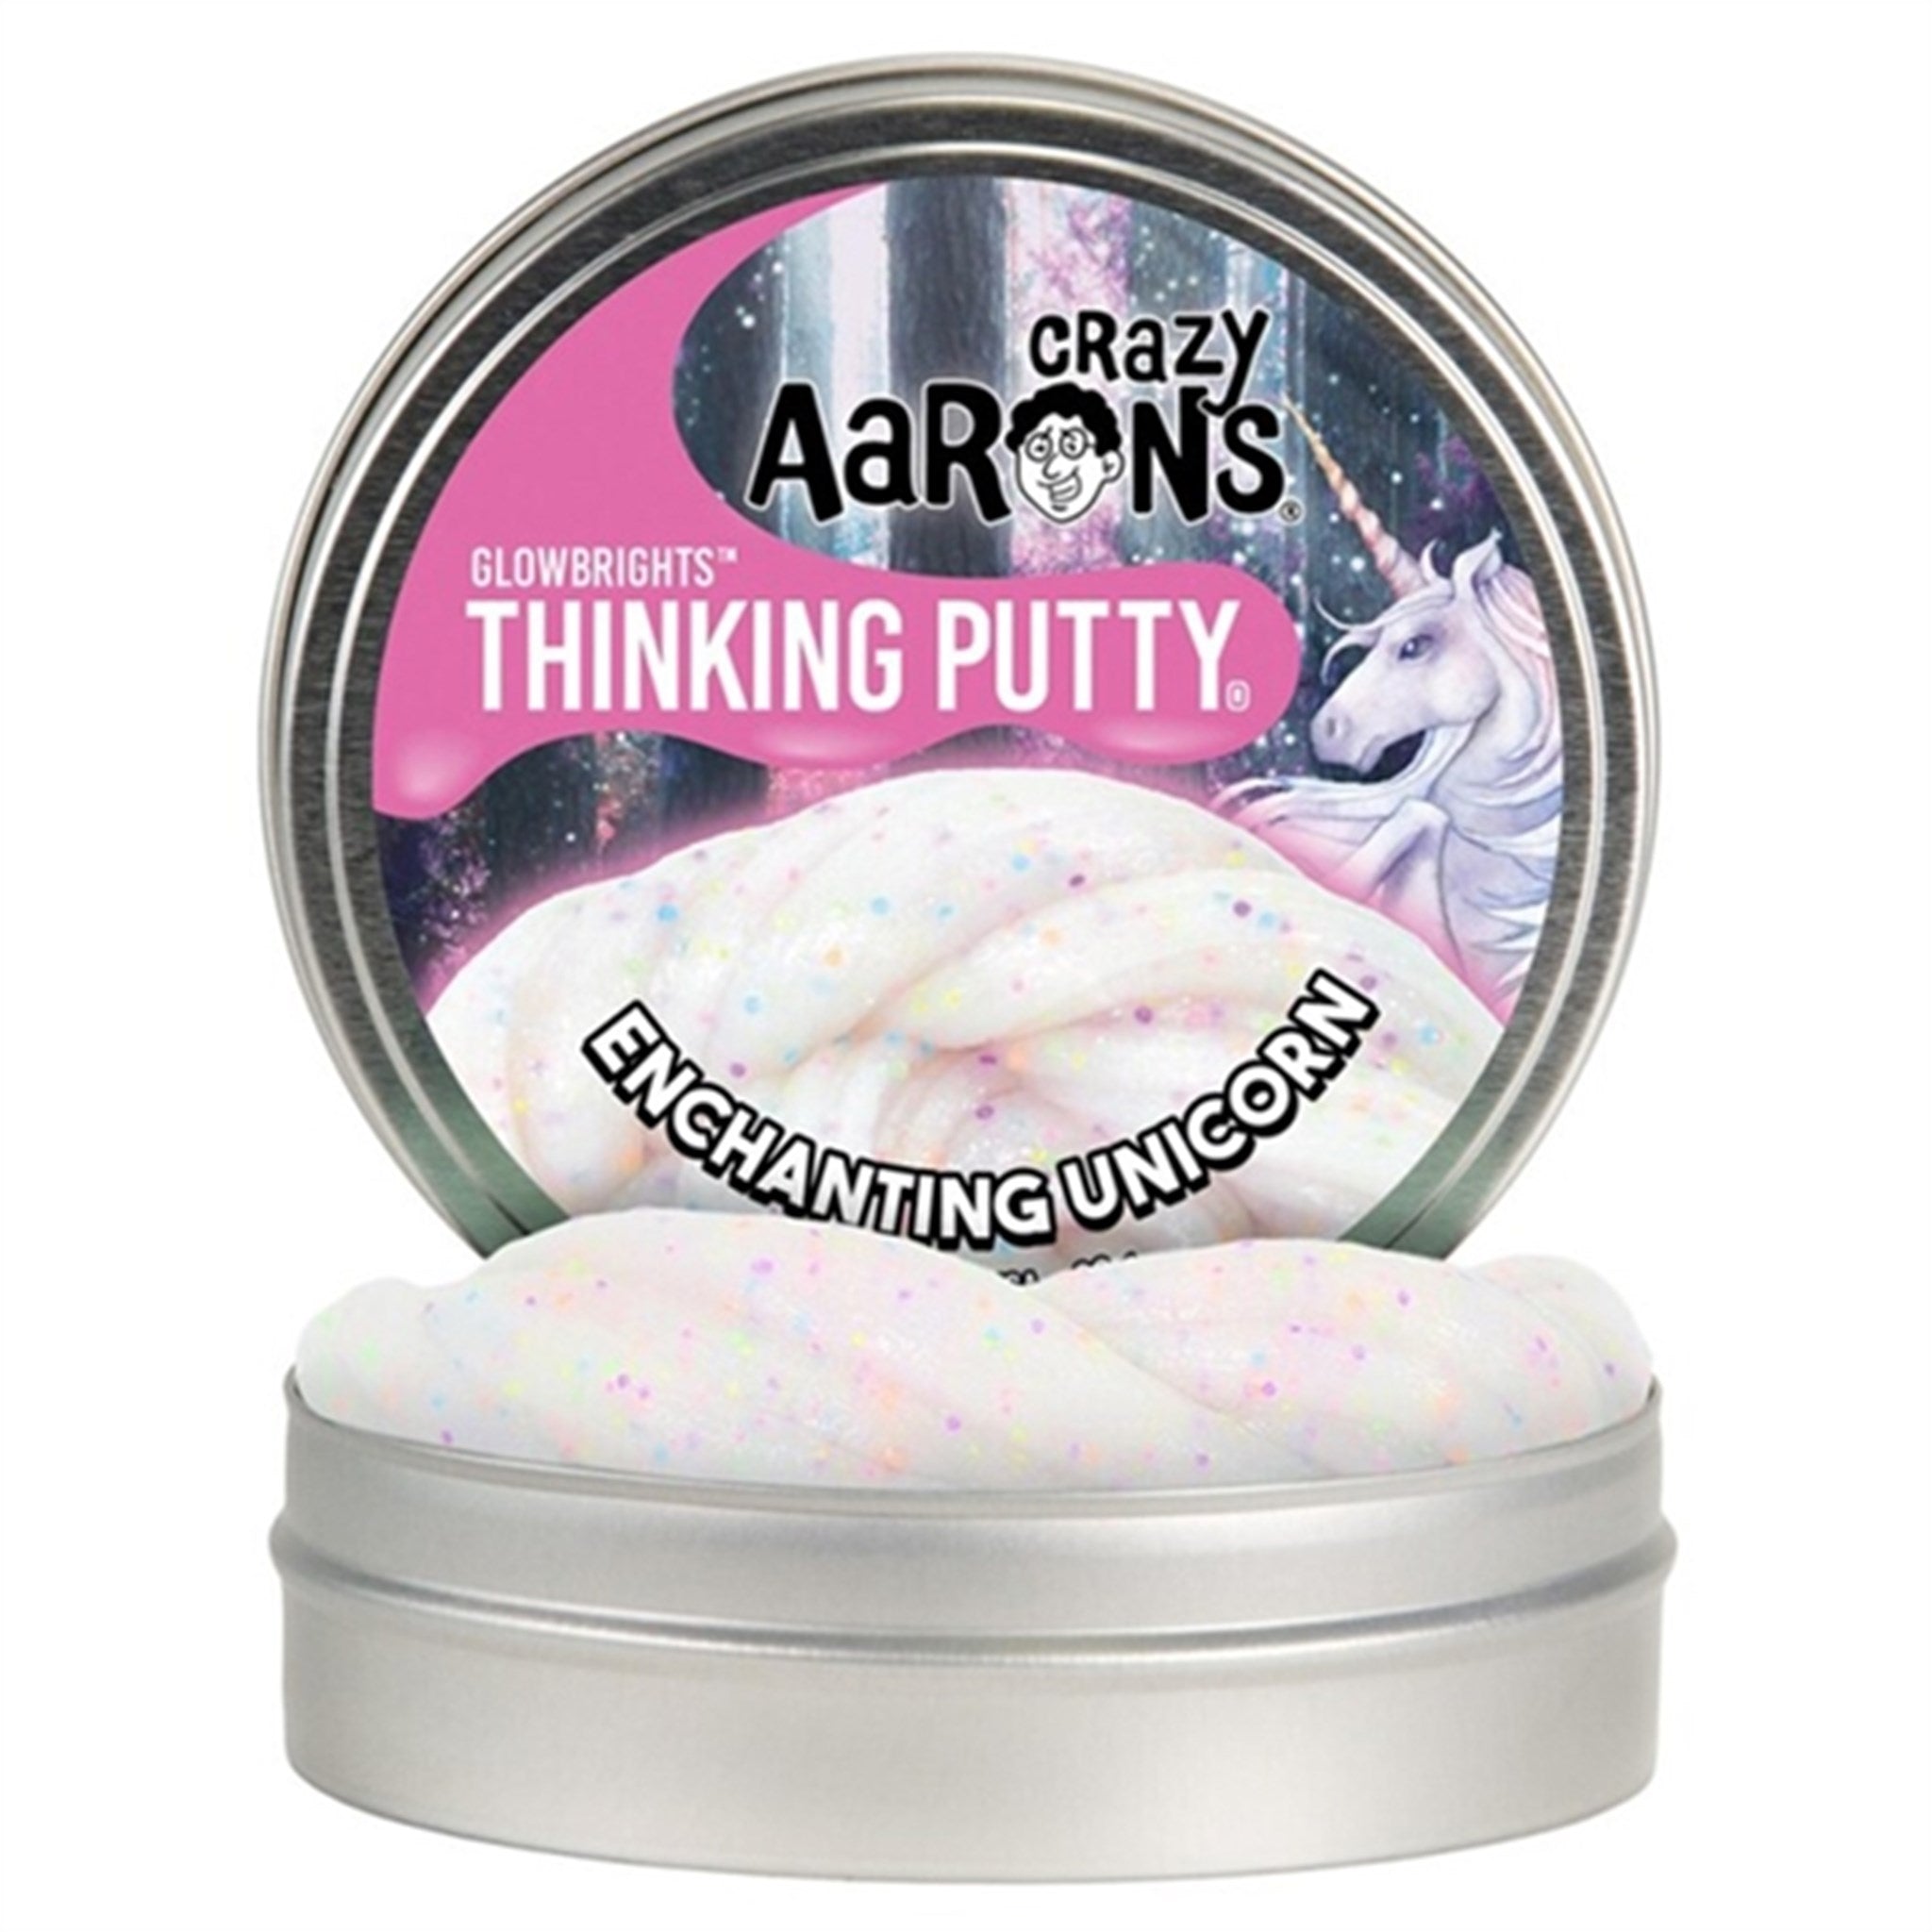 Crazy Aaron's® Thinking Putty Trendsetters - Enchanting Unicorn